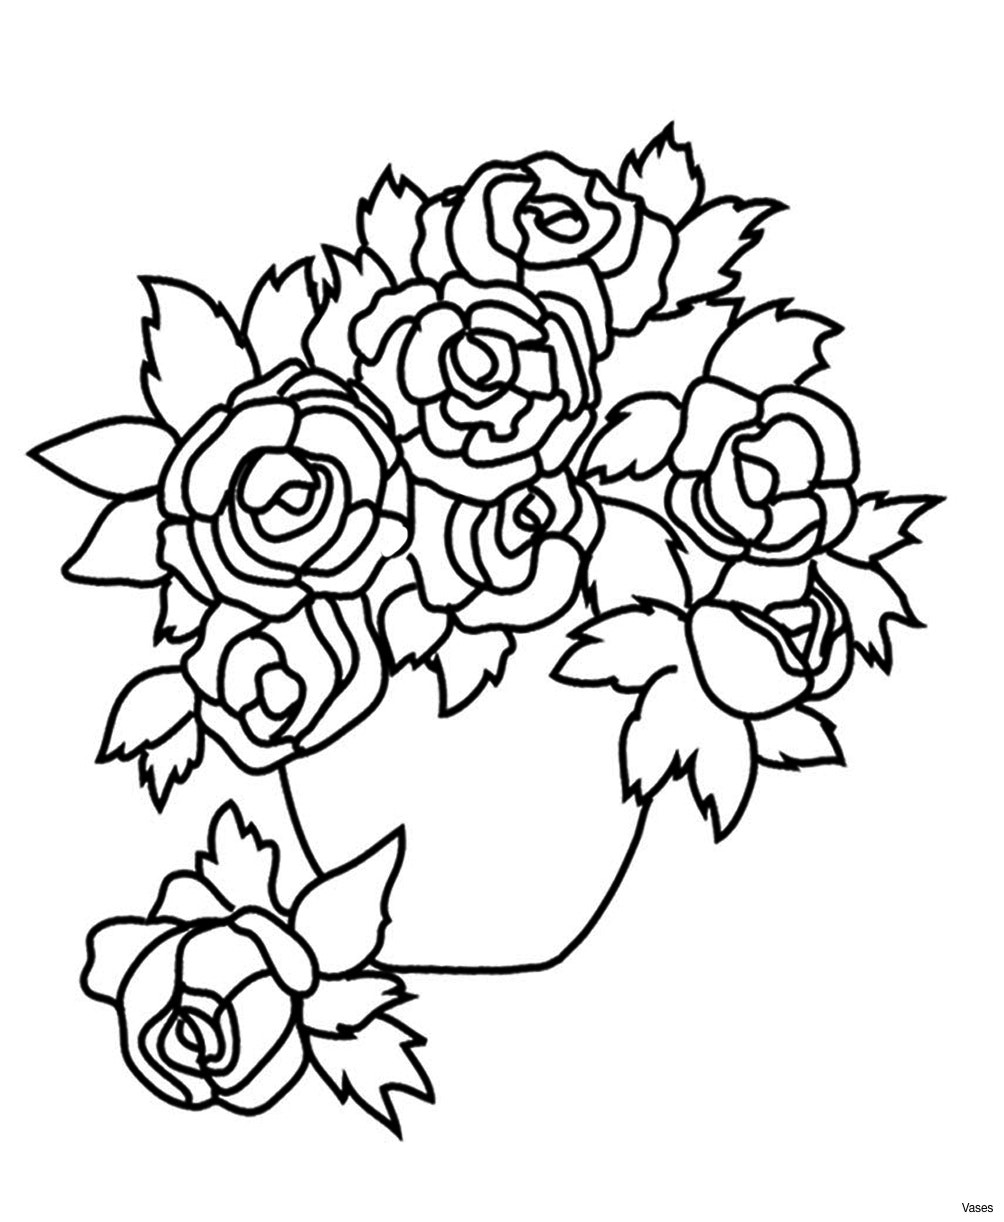 15 Famous Flower Vase Pic 2024 free download flower vase pic of cool vases flower vase coloring page pages flowers in a top i 0d within cool coloring pages cool vases flower vase coloring page pages flowers in a top i